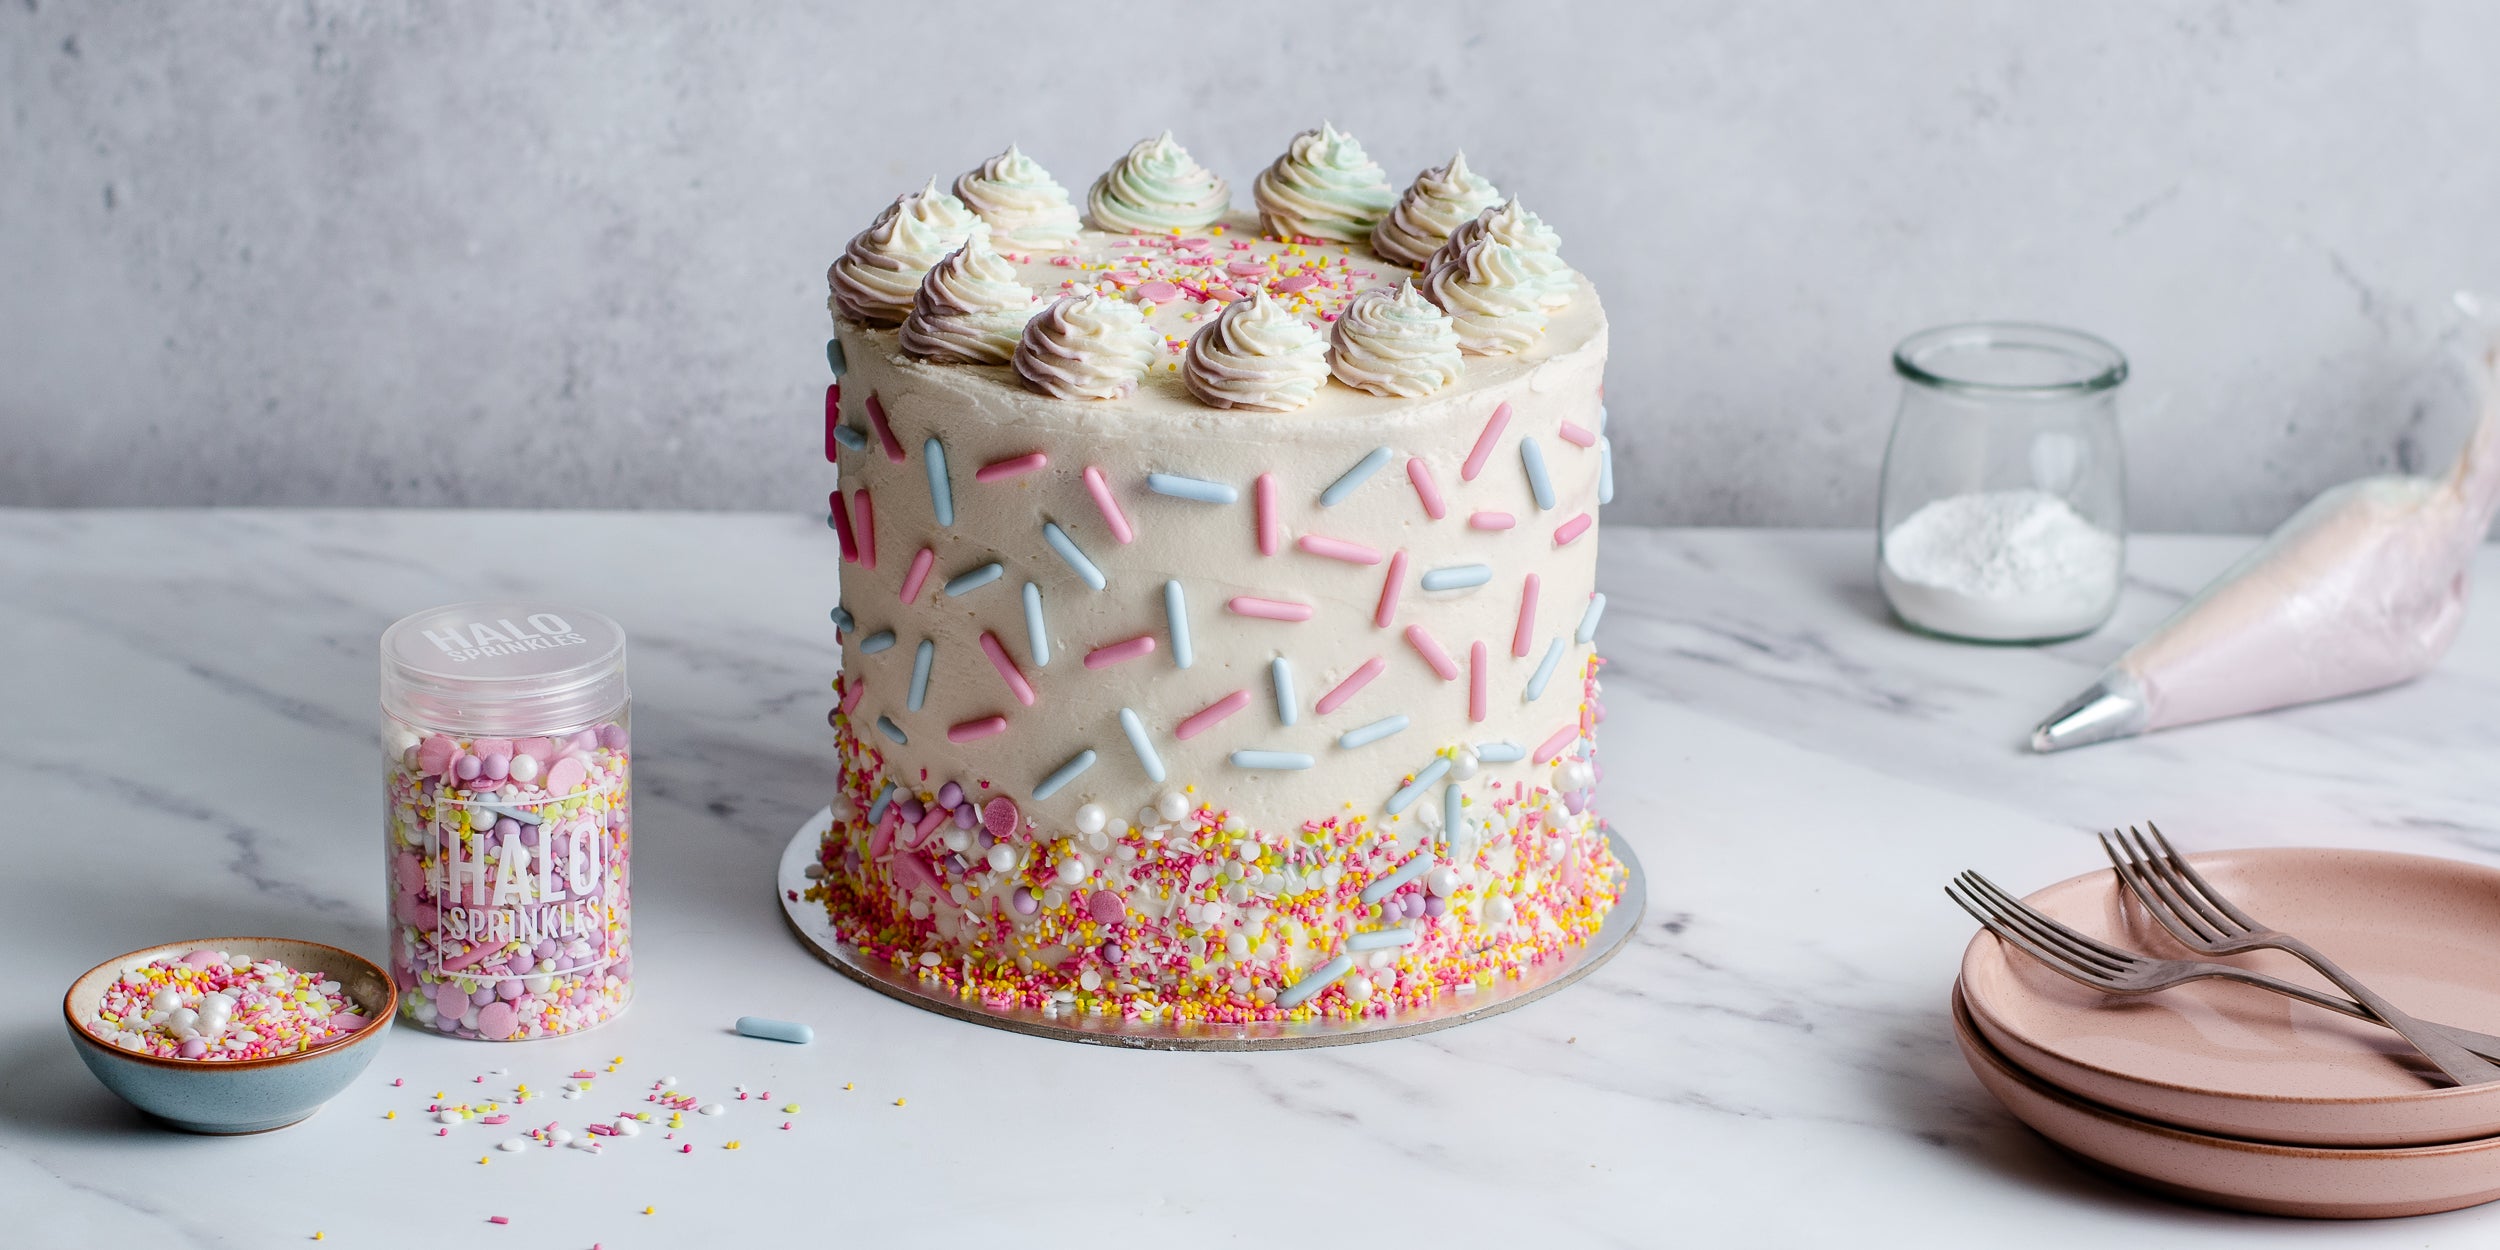 Cake covered in buttercream and sprinkles. Pot of sprinkles beside it along with piping bag and crockery